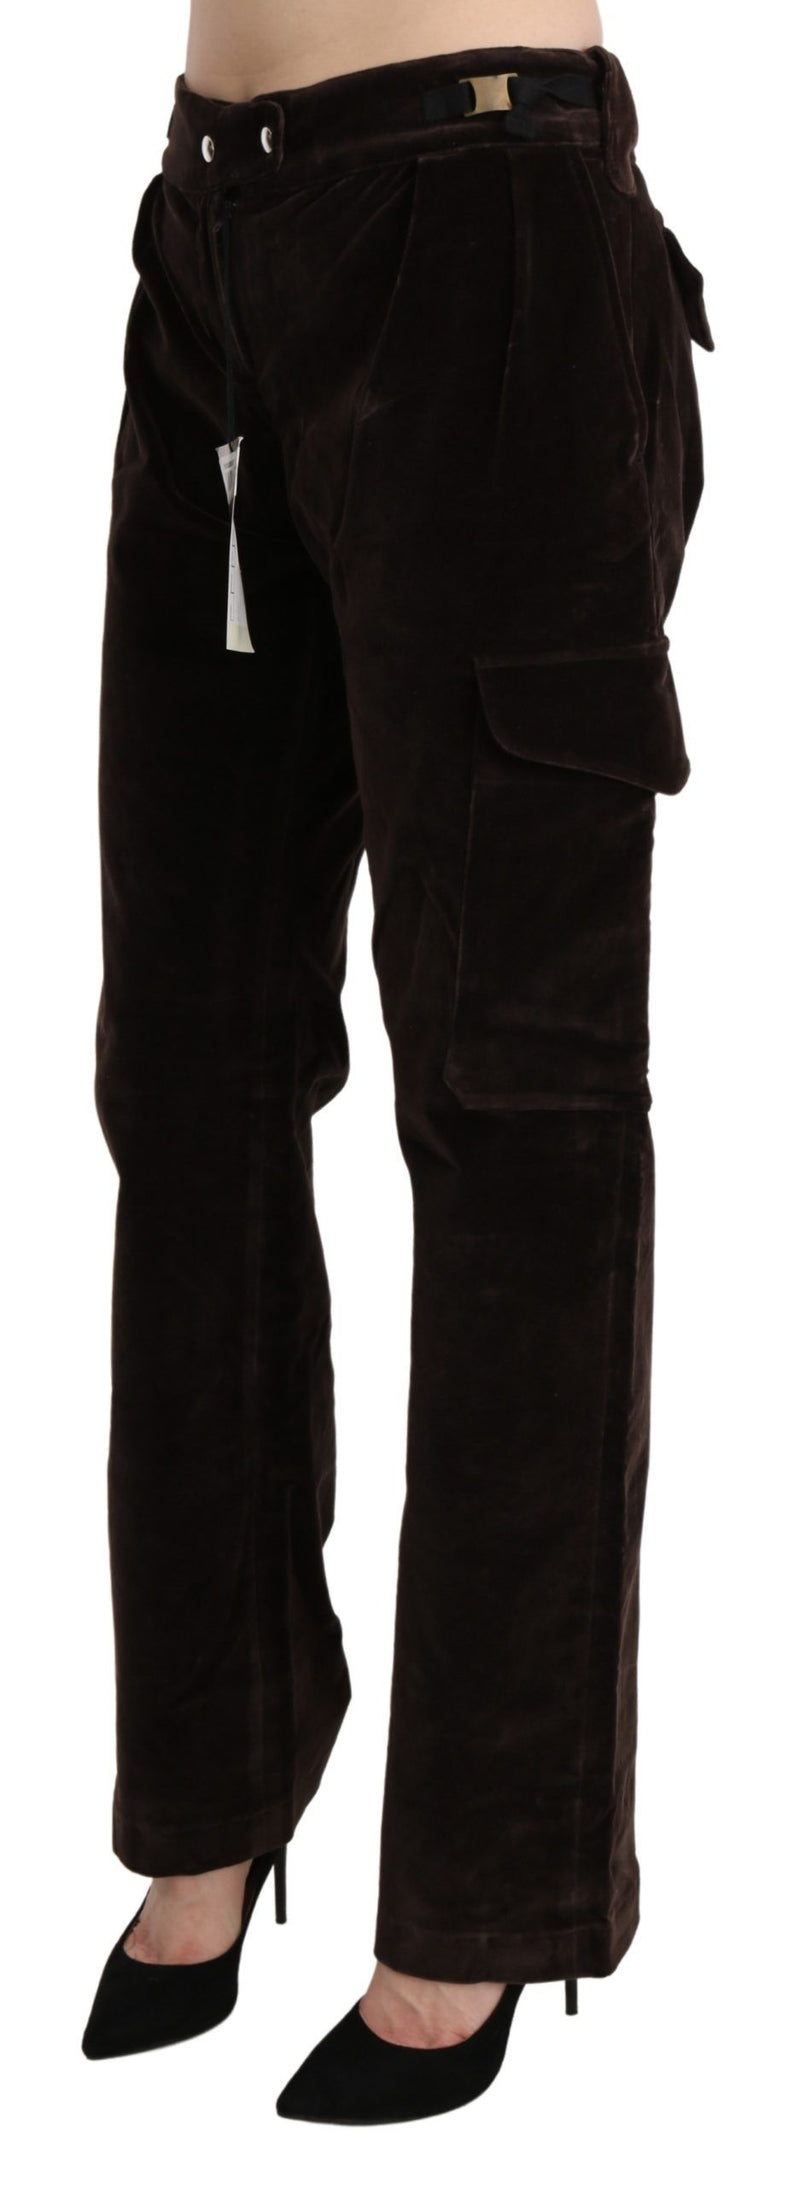 Ermanno Scervino Chic High Waist Cargo Pants in Sophisticated Women's Brown